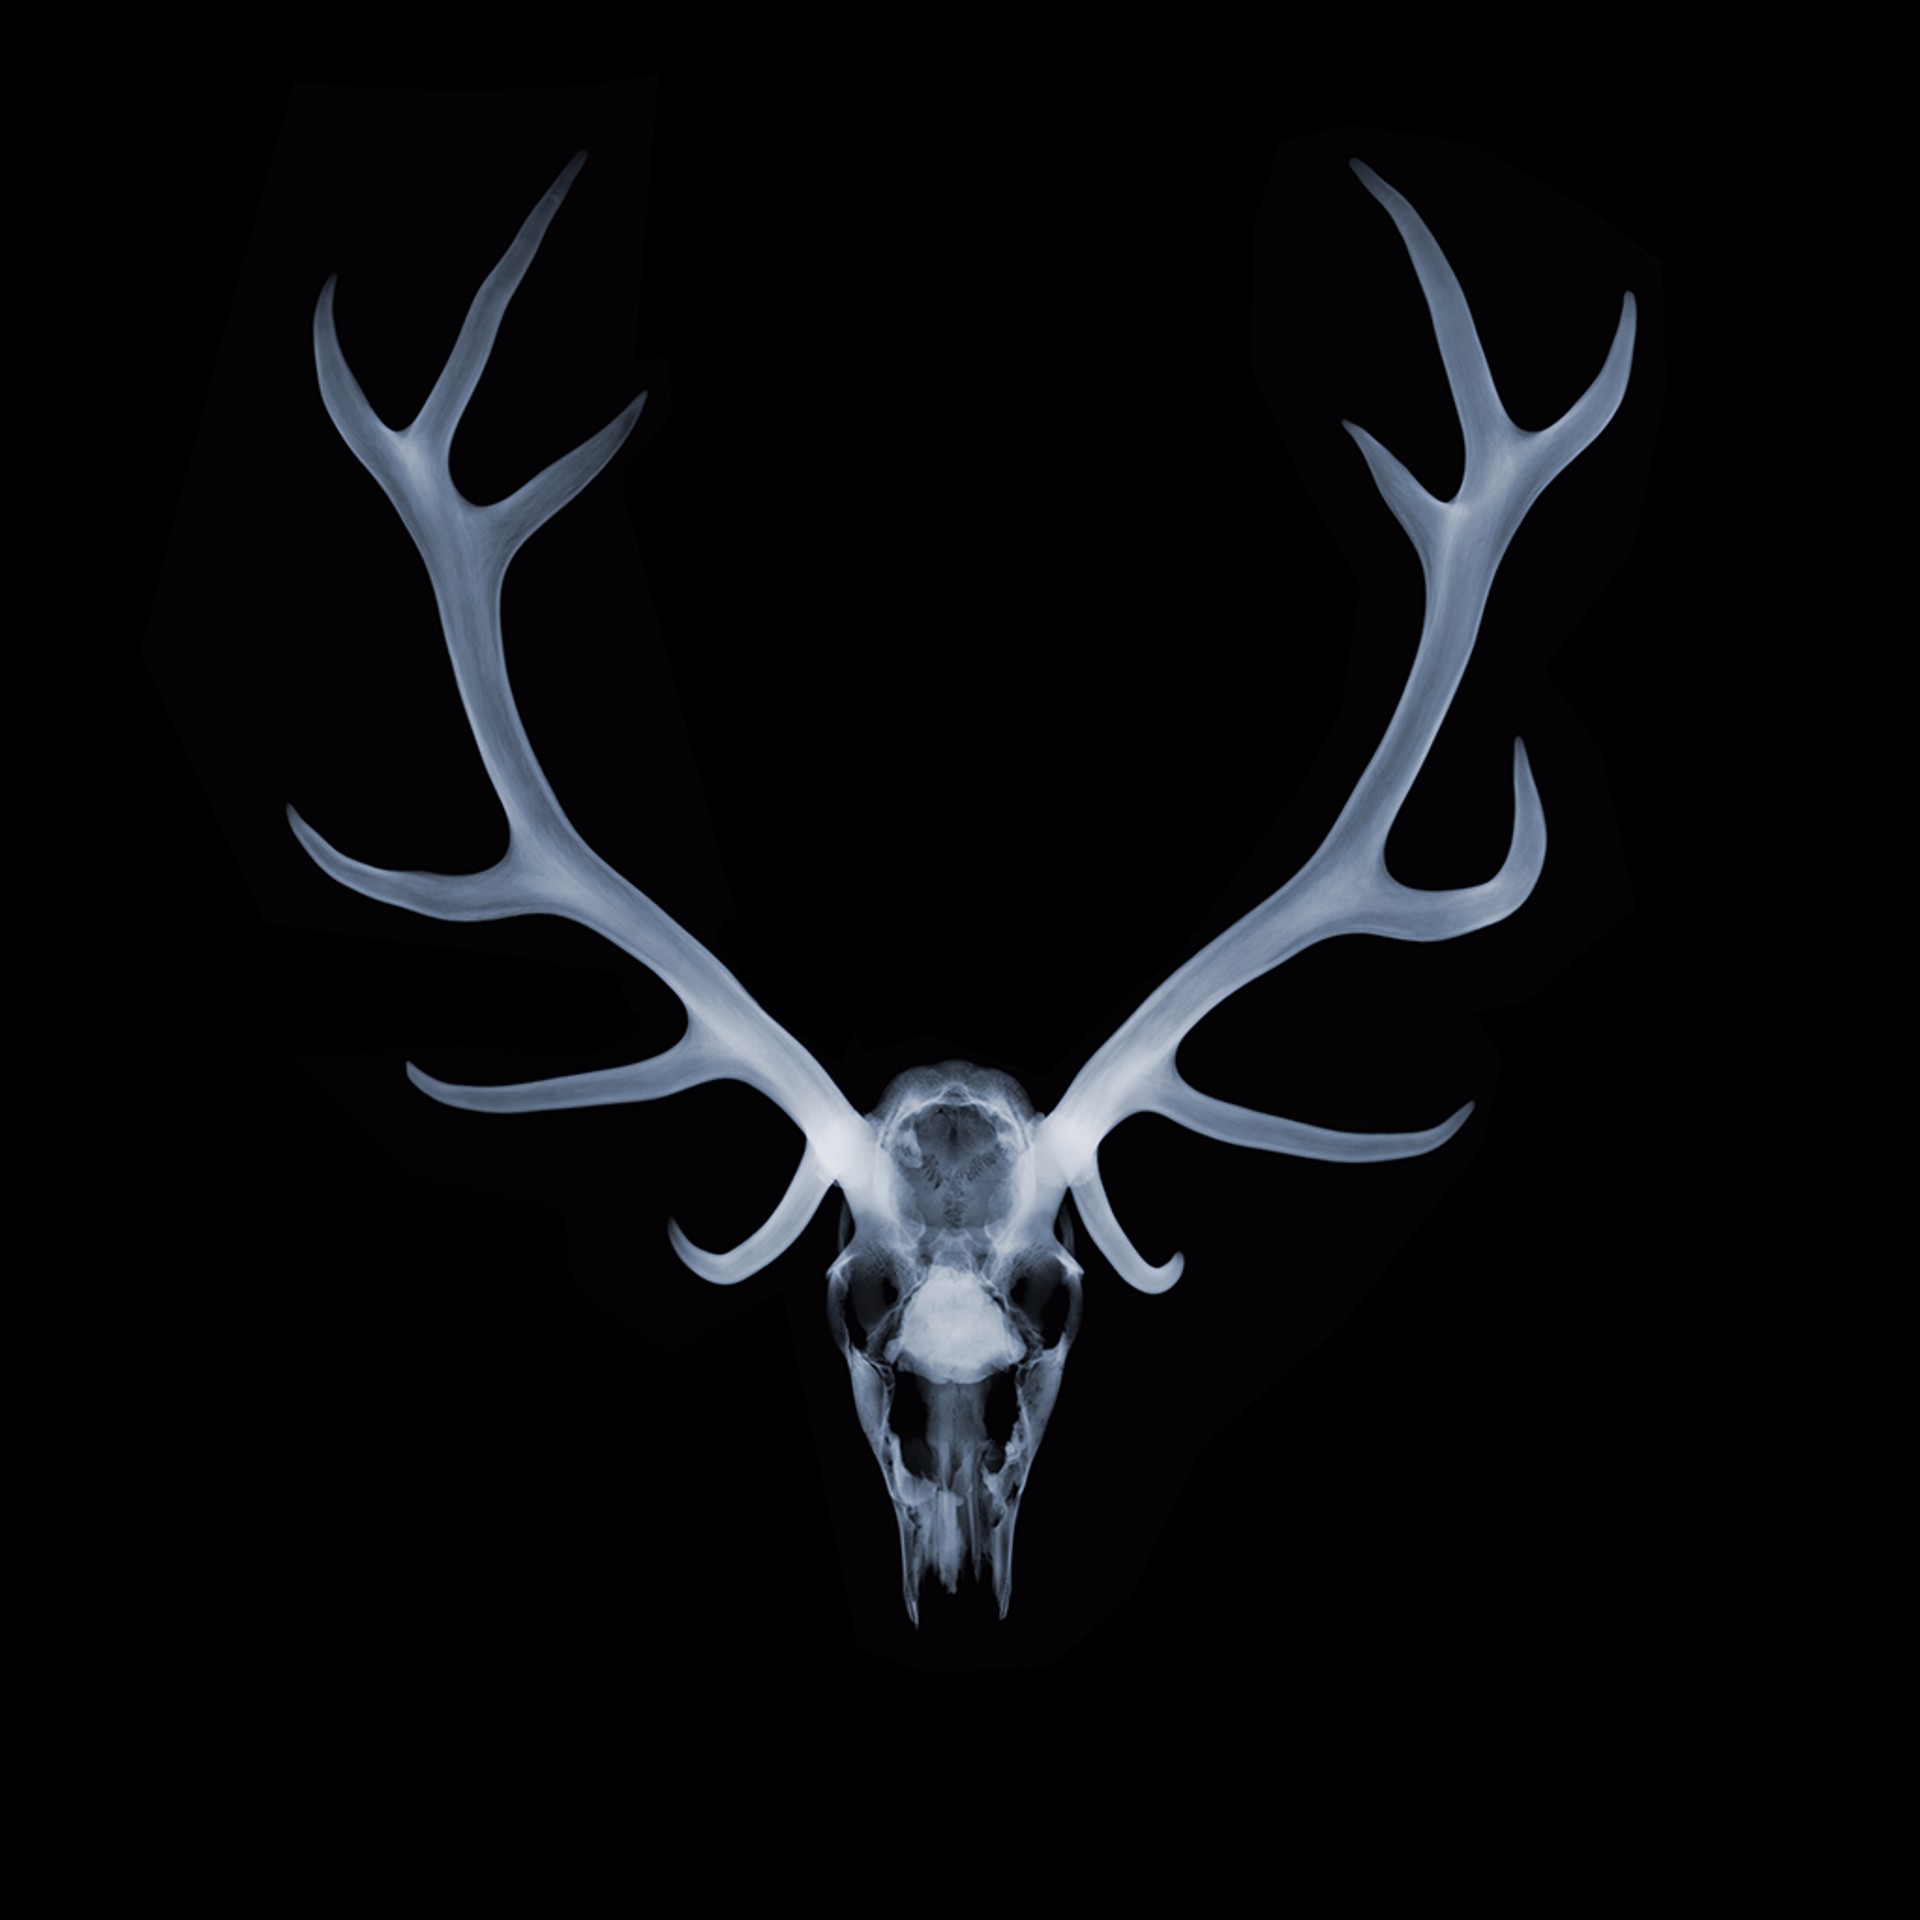 Antlers by Nick Veasey